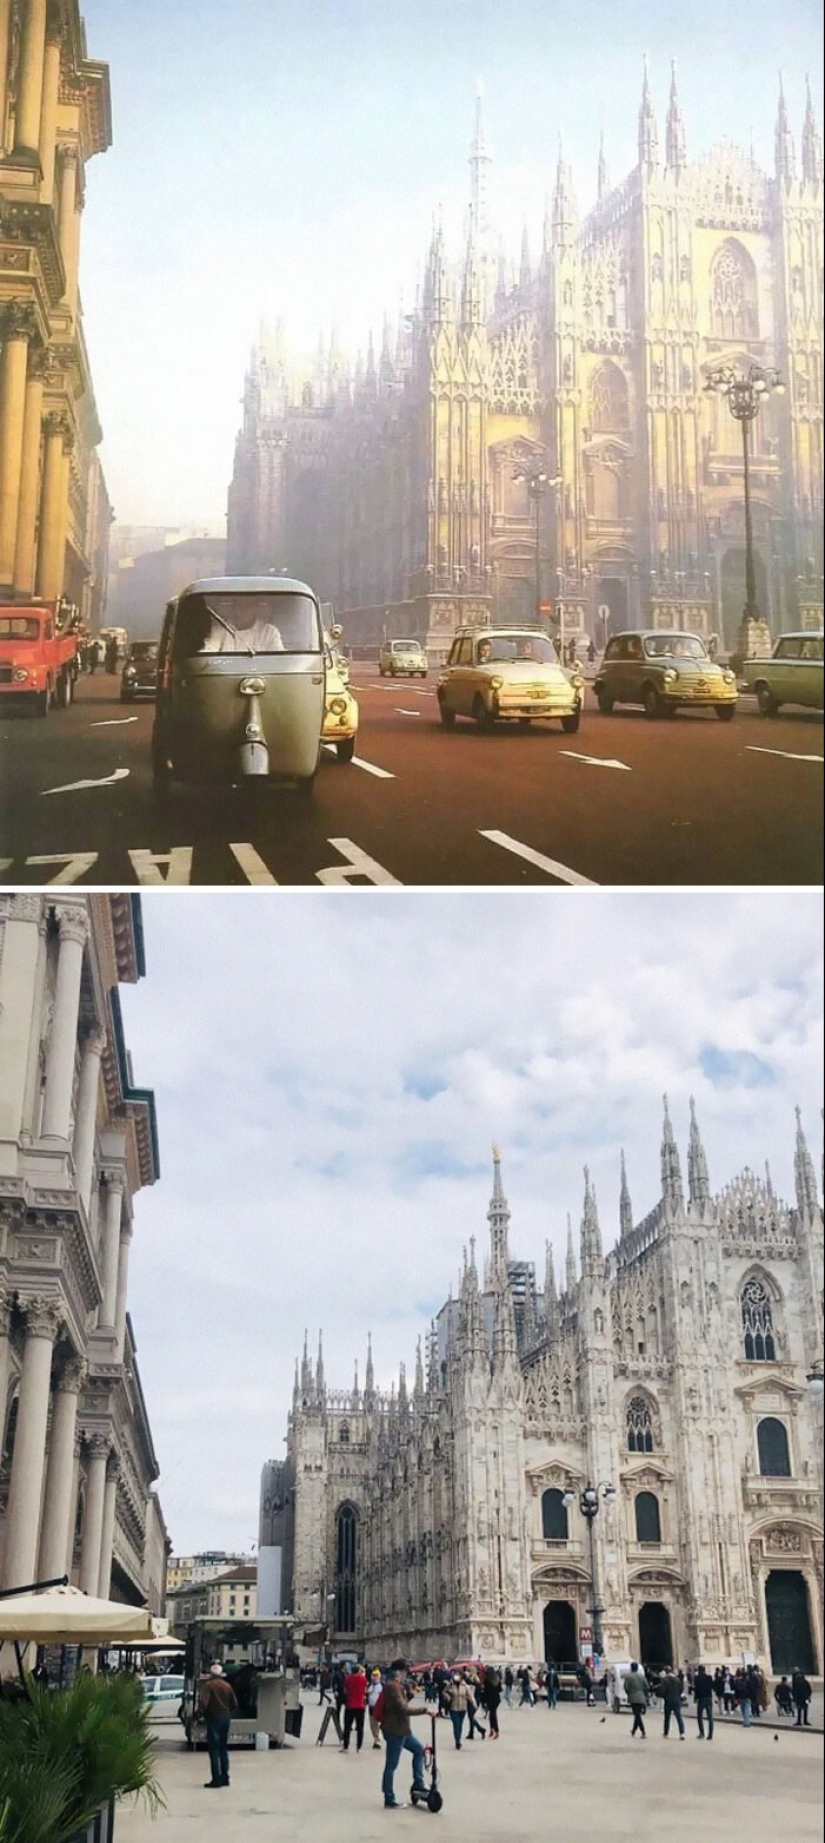 Then and now: 30 photo comparisons that show how the world is changing